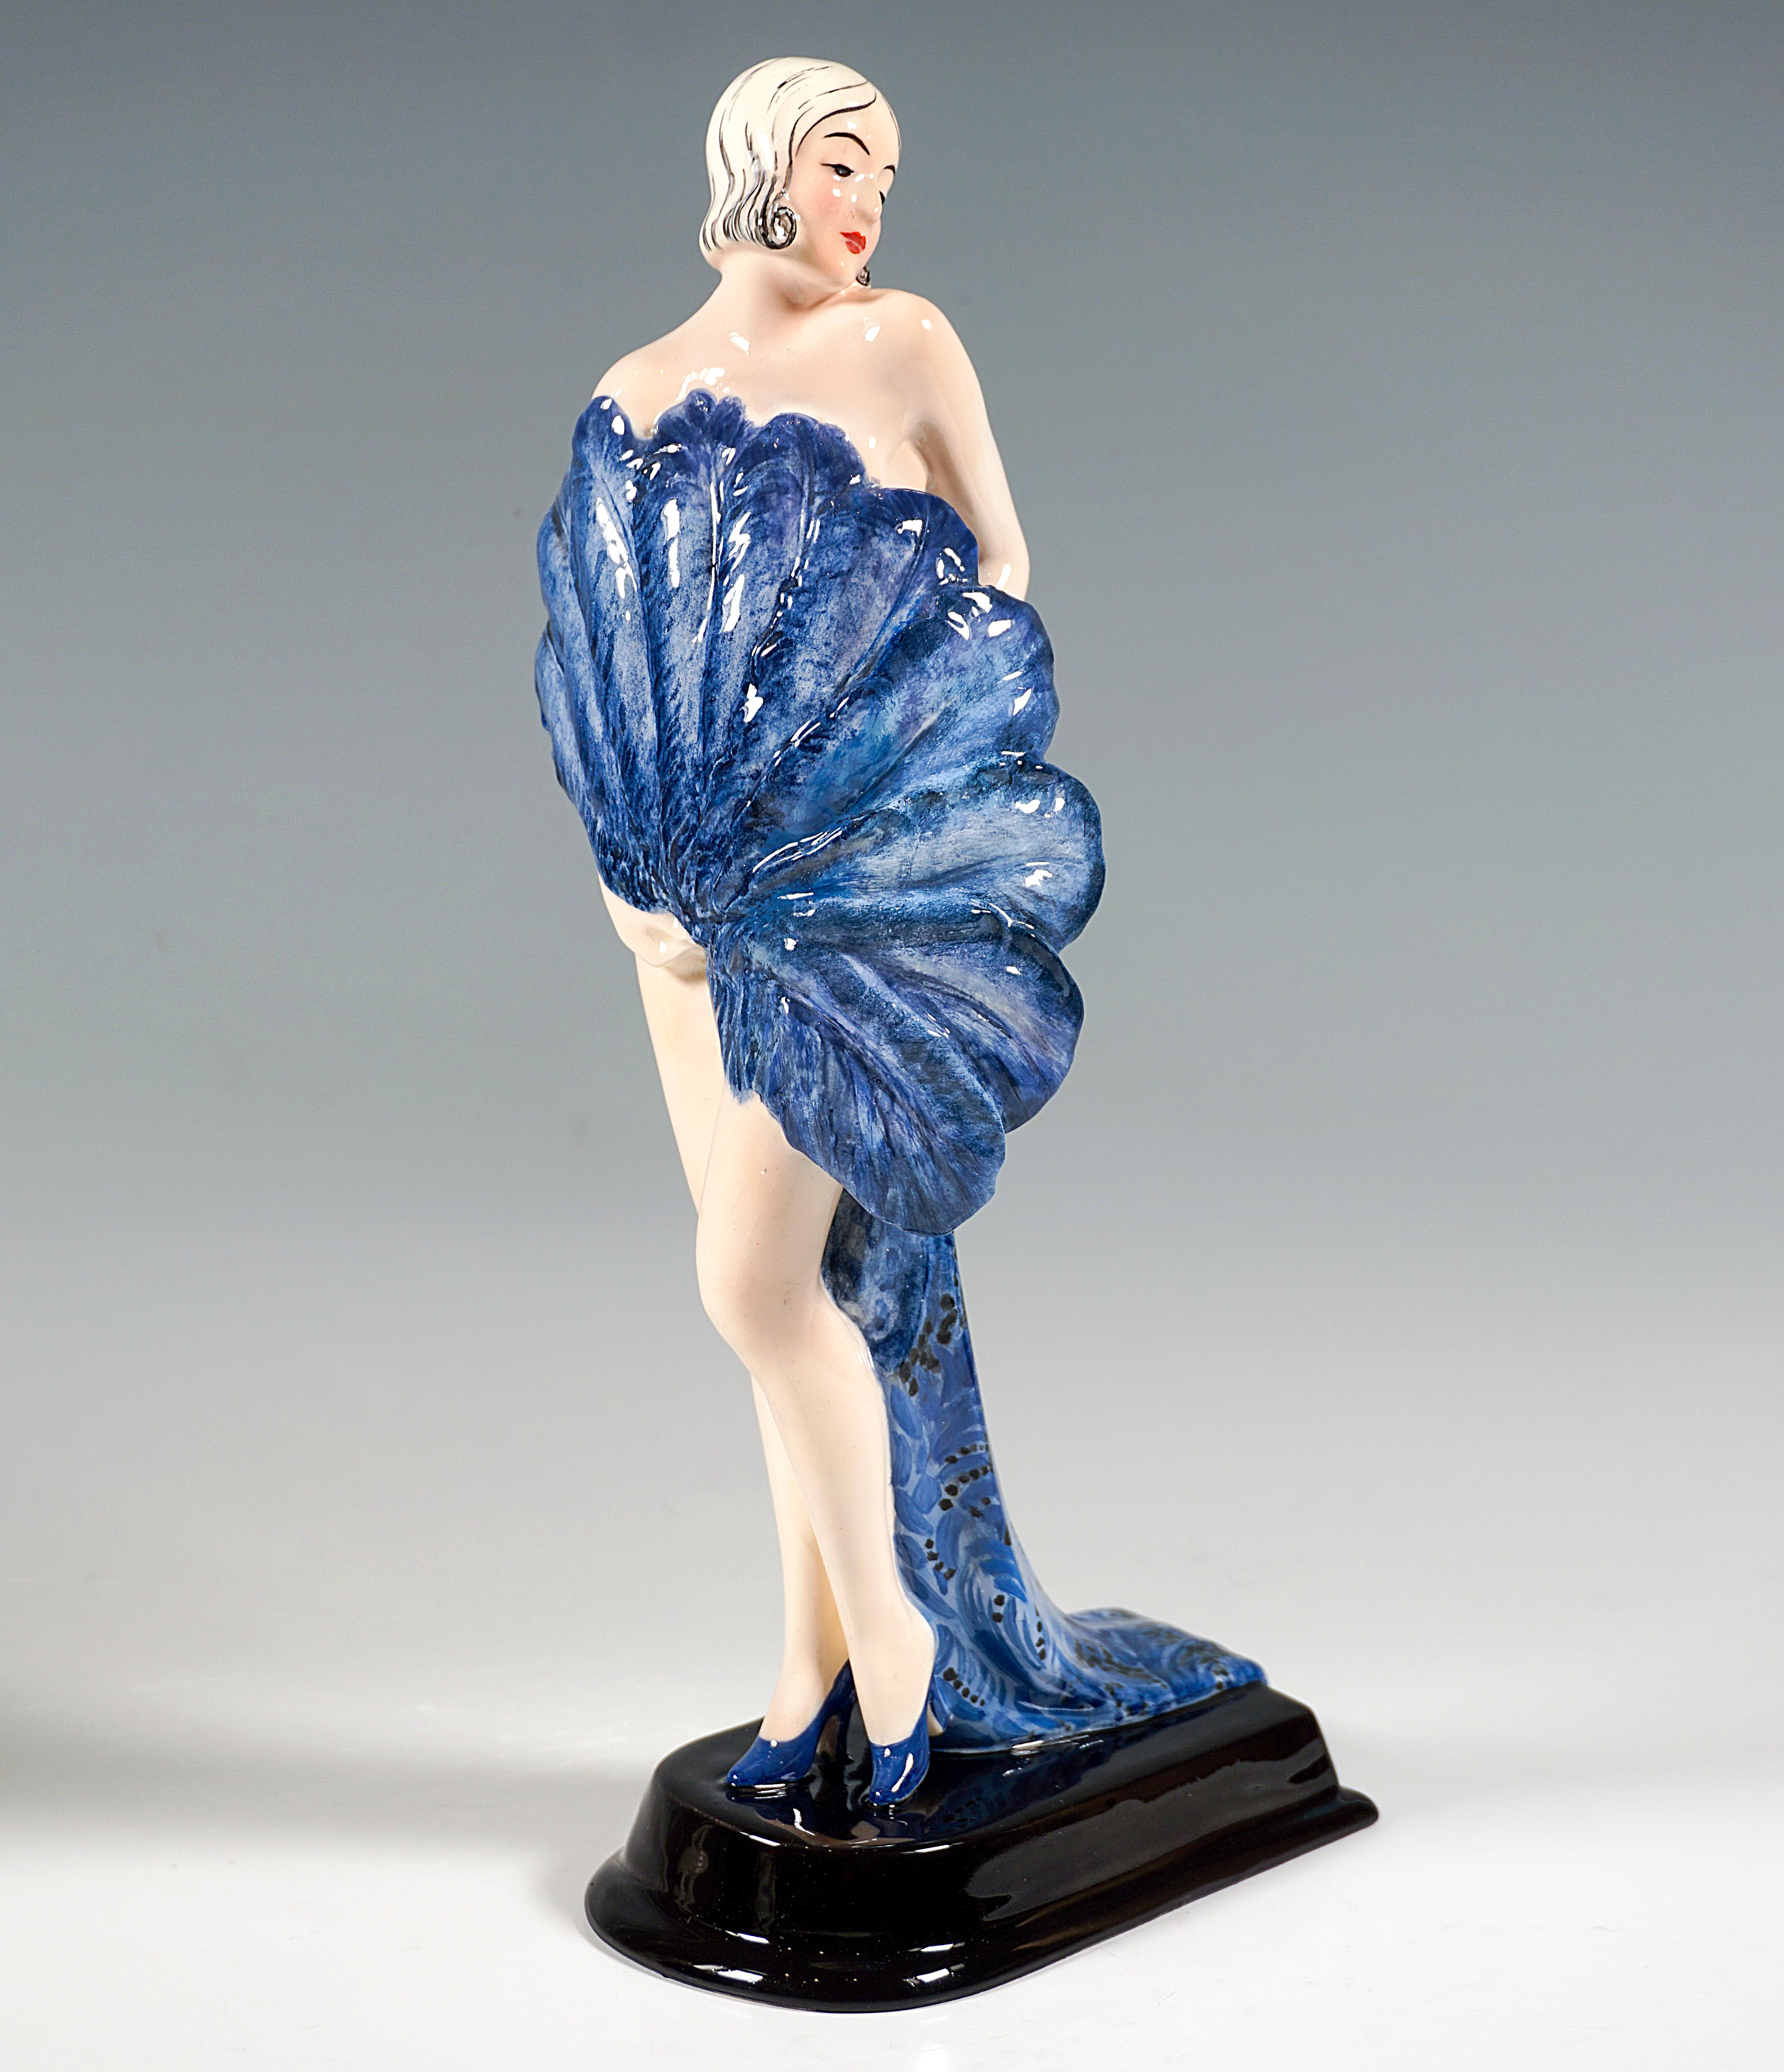 Rare Goldscheider Art Ceramics From The Early 1930s:
Standing, young variety dancer, wearing only high heels, looking to the left over her shoulder, holding a large fan in her right hand in front of her and covering her nakedness, in her left hand